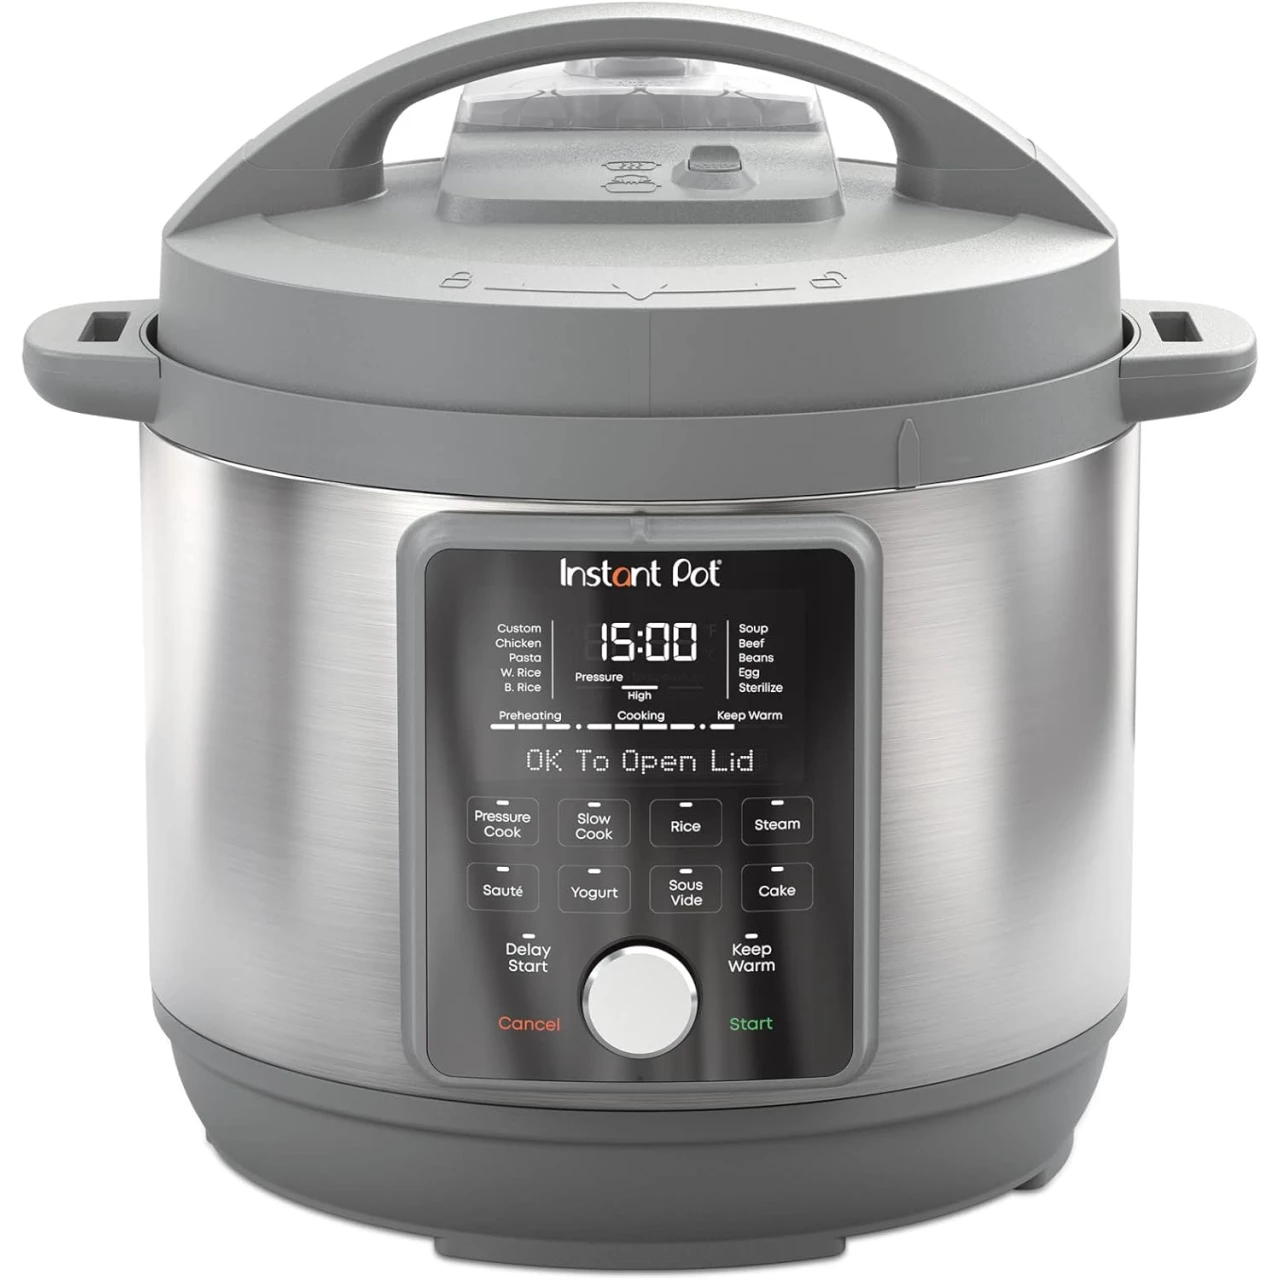 Instant Pot Duo Plus, 6-Quart Whisper Quiet 9-in-1 Electric Pressure Cooker, Slow Cooker, Rice Cooker, Steamer, Sauté, Yogurt Maker, Warmer &amp; Sterilizer, Free App with 1900+ Recipes, Stainless Steel